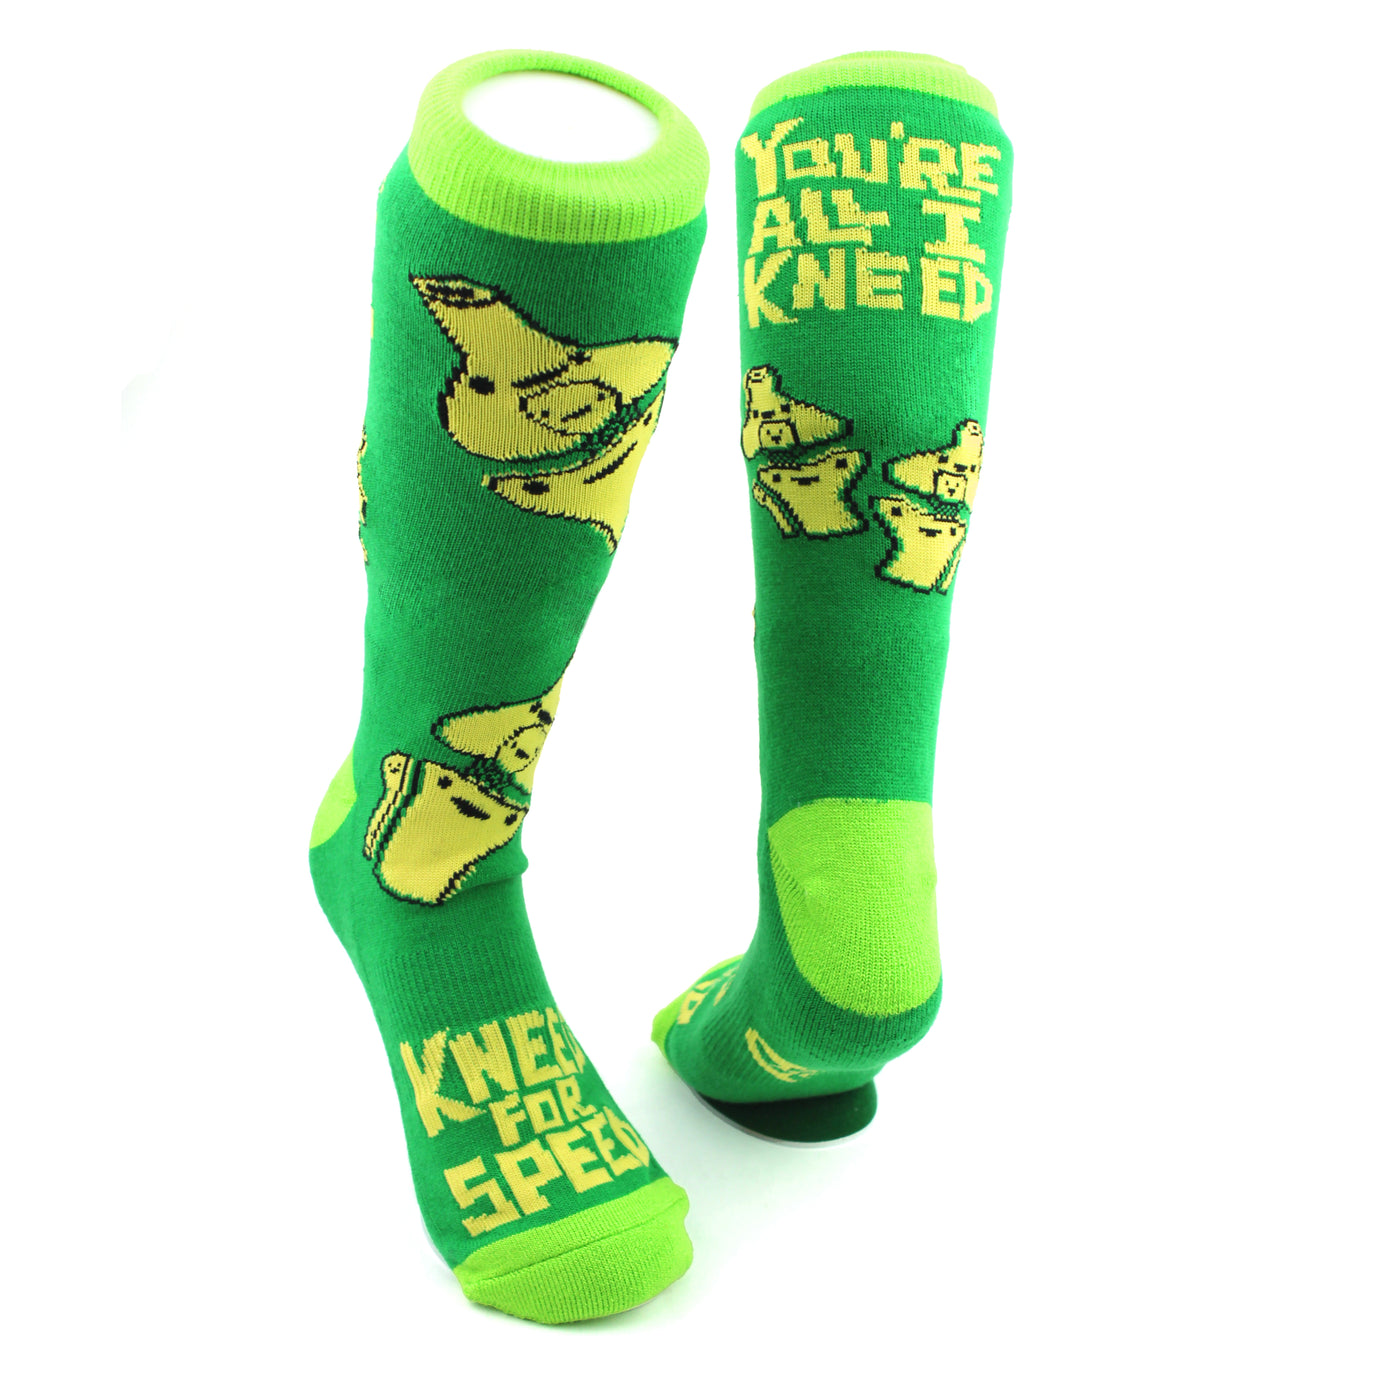 Knee Socks - Kneed for Speed Knee Replacement ACL Surgery Gift - I Heart Guts